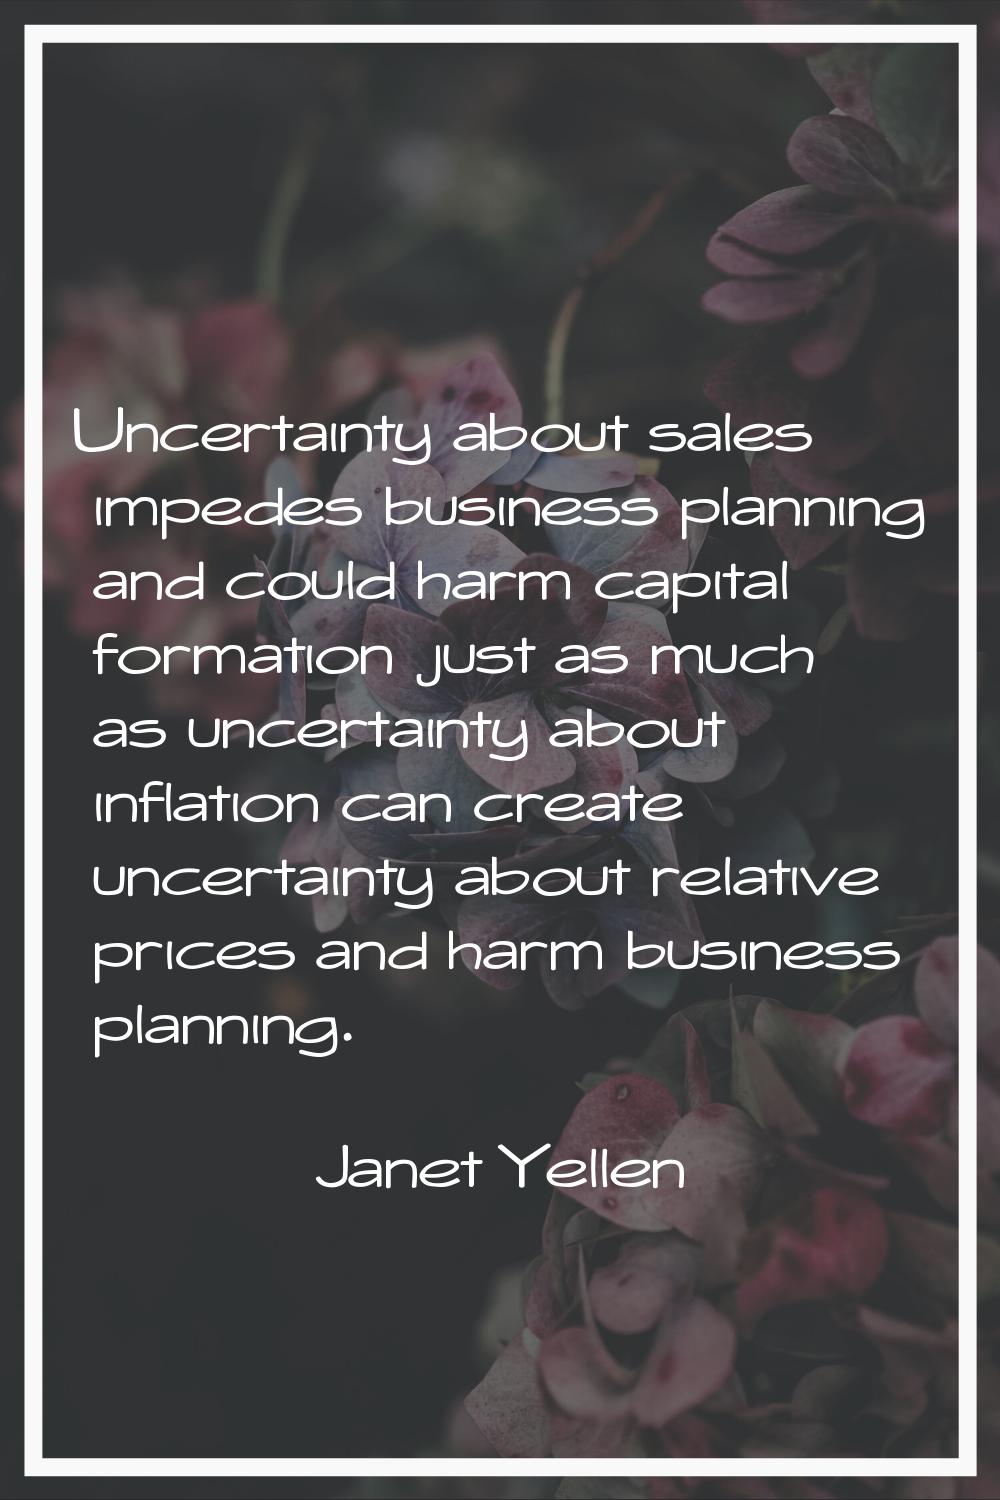 Uncertainty about sales impedes business planning and could harm capital formation just as much as 